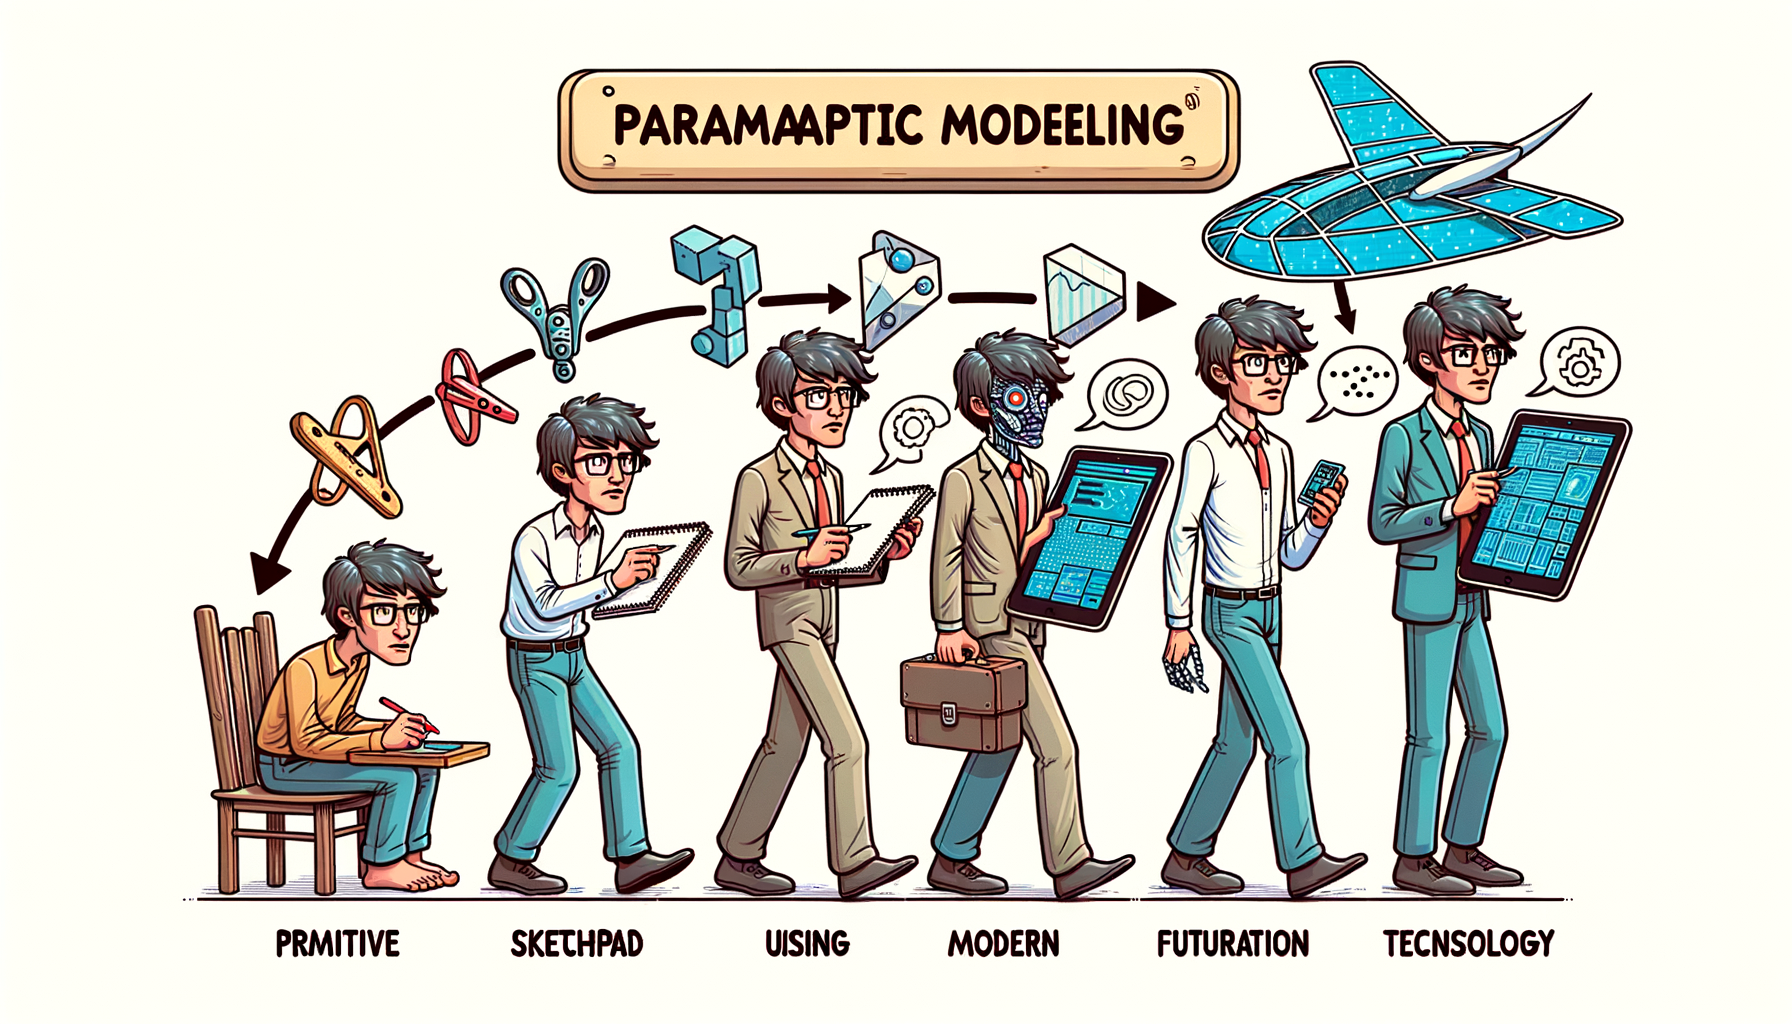 Design Software History: The Evolution of Parametric Modeling: From Sketchpad to Modern Design Software and Beyond